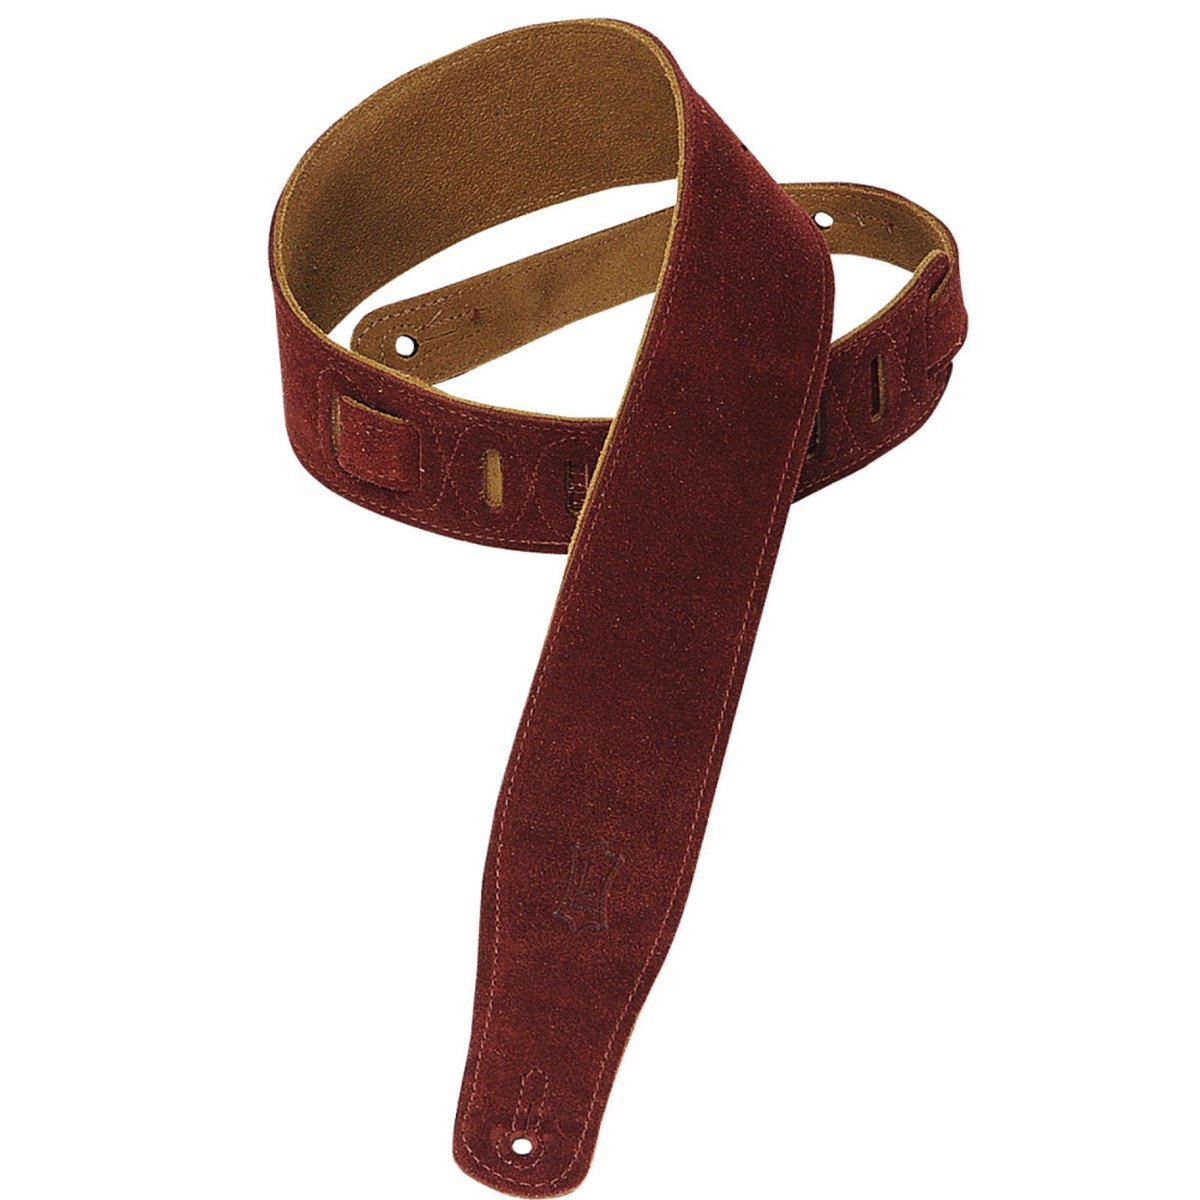 Levy's MS26 2.5 Inch Suede Guitar Strap, Burgundy